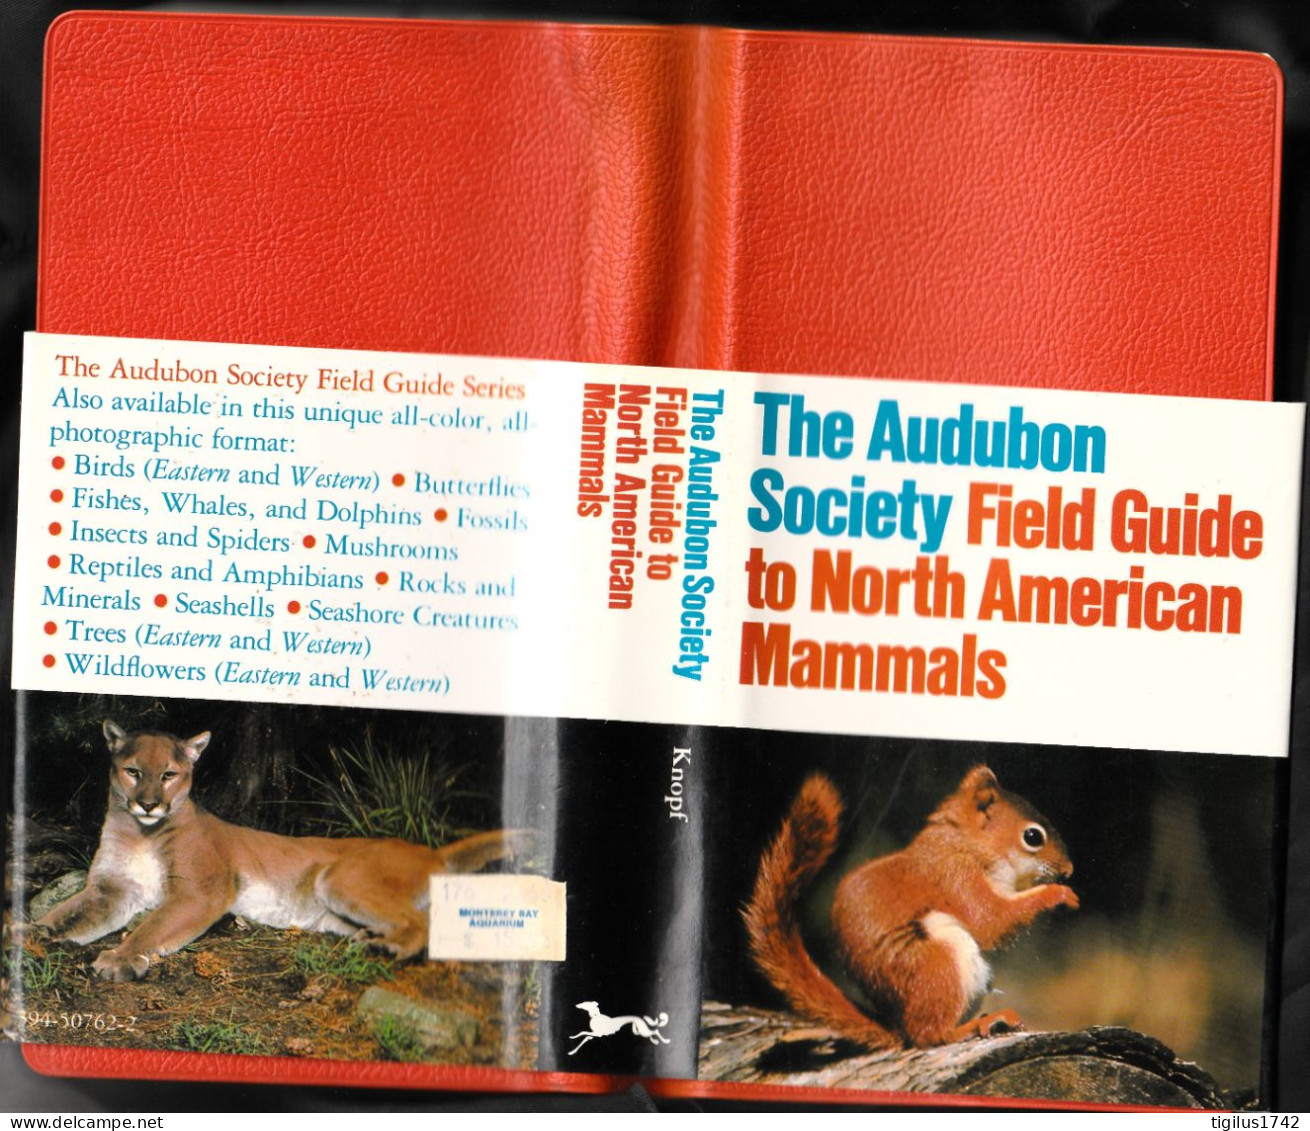 O. Whitaker And Robert Elman. Field Guide To North American Mammals. The Audubon Society, Alfred A. Knopf, New York - Wildlife